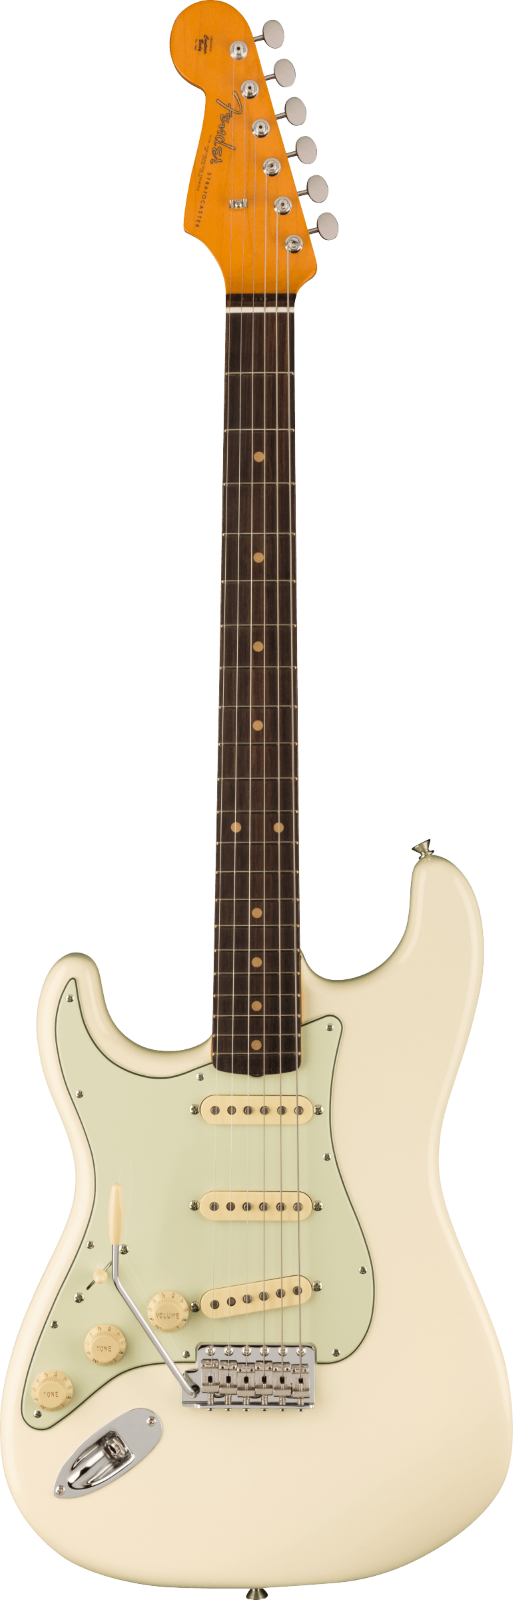 Fender American Vintage II 1961 Stratocaster Left-Hand, Rosewood Fingerboard, Olympic White : photo 1